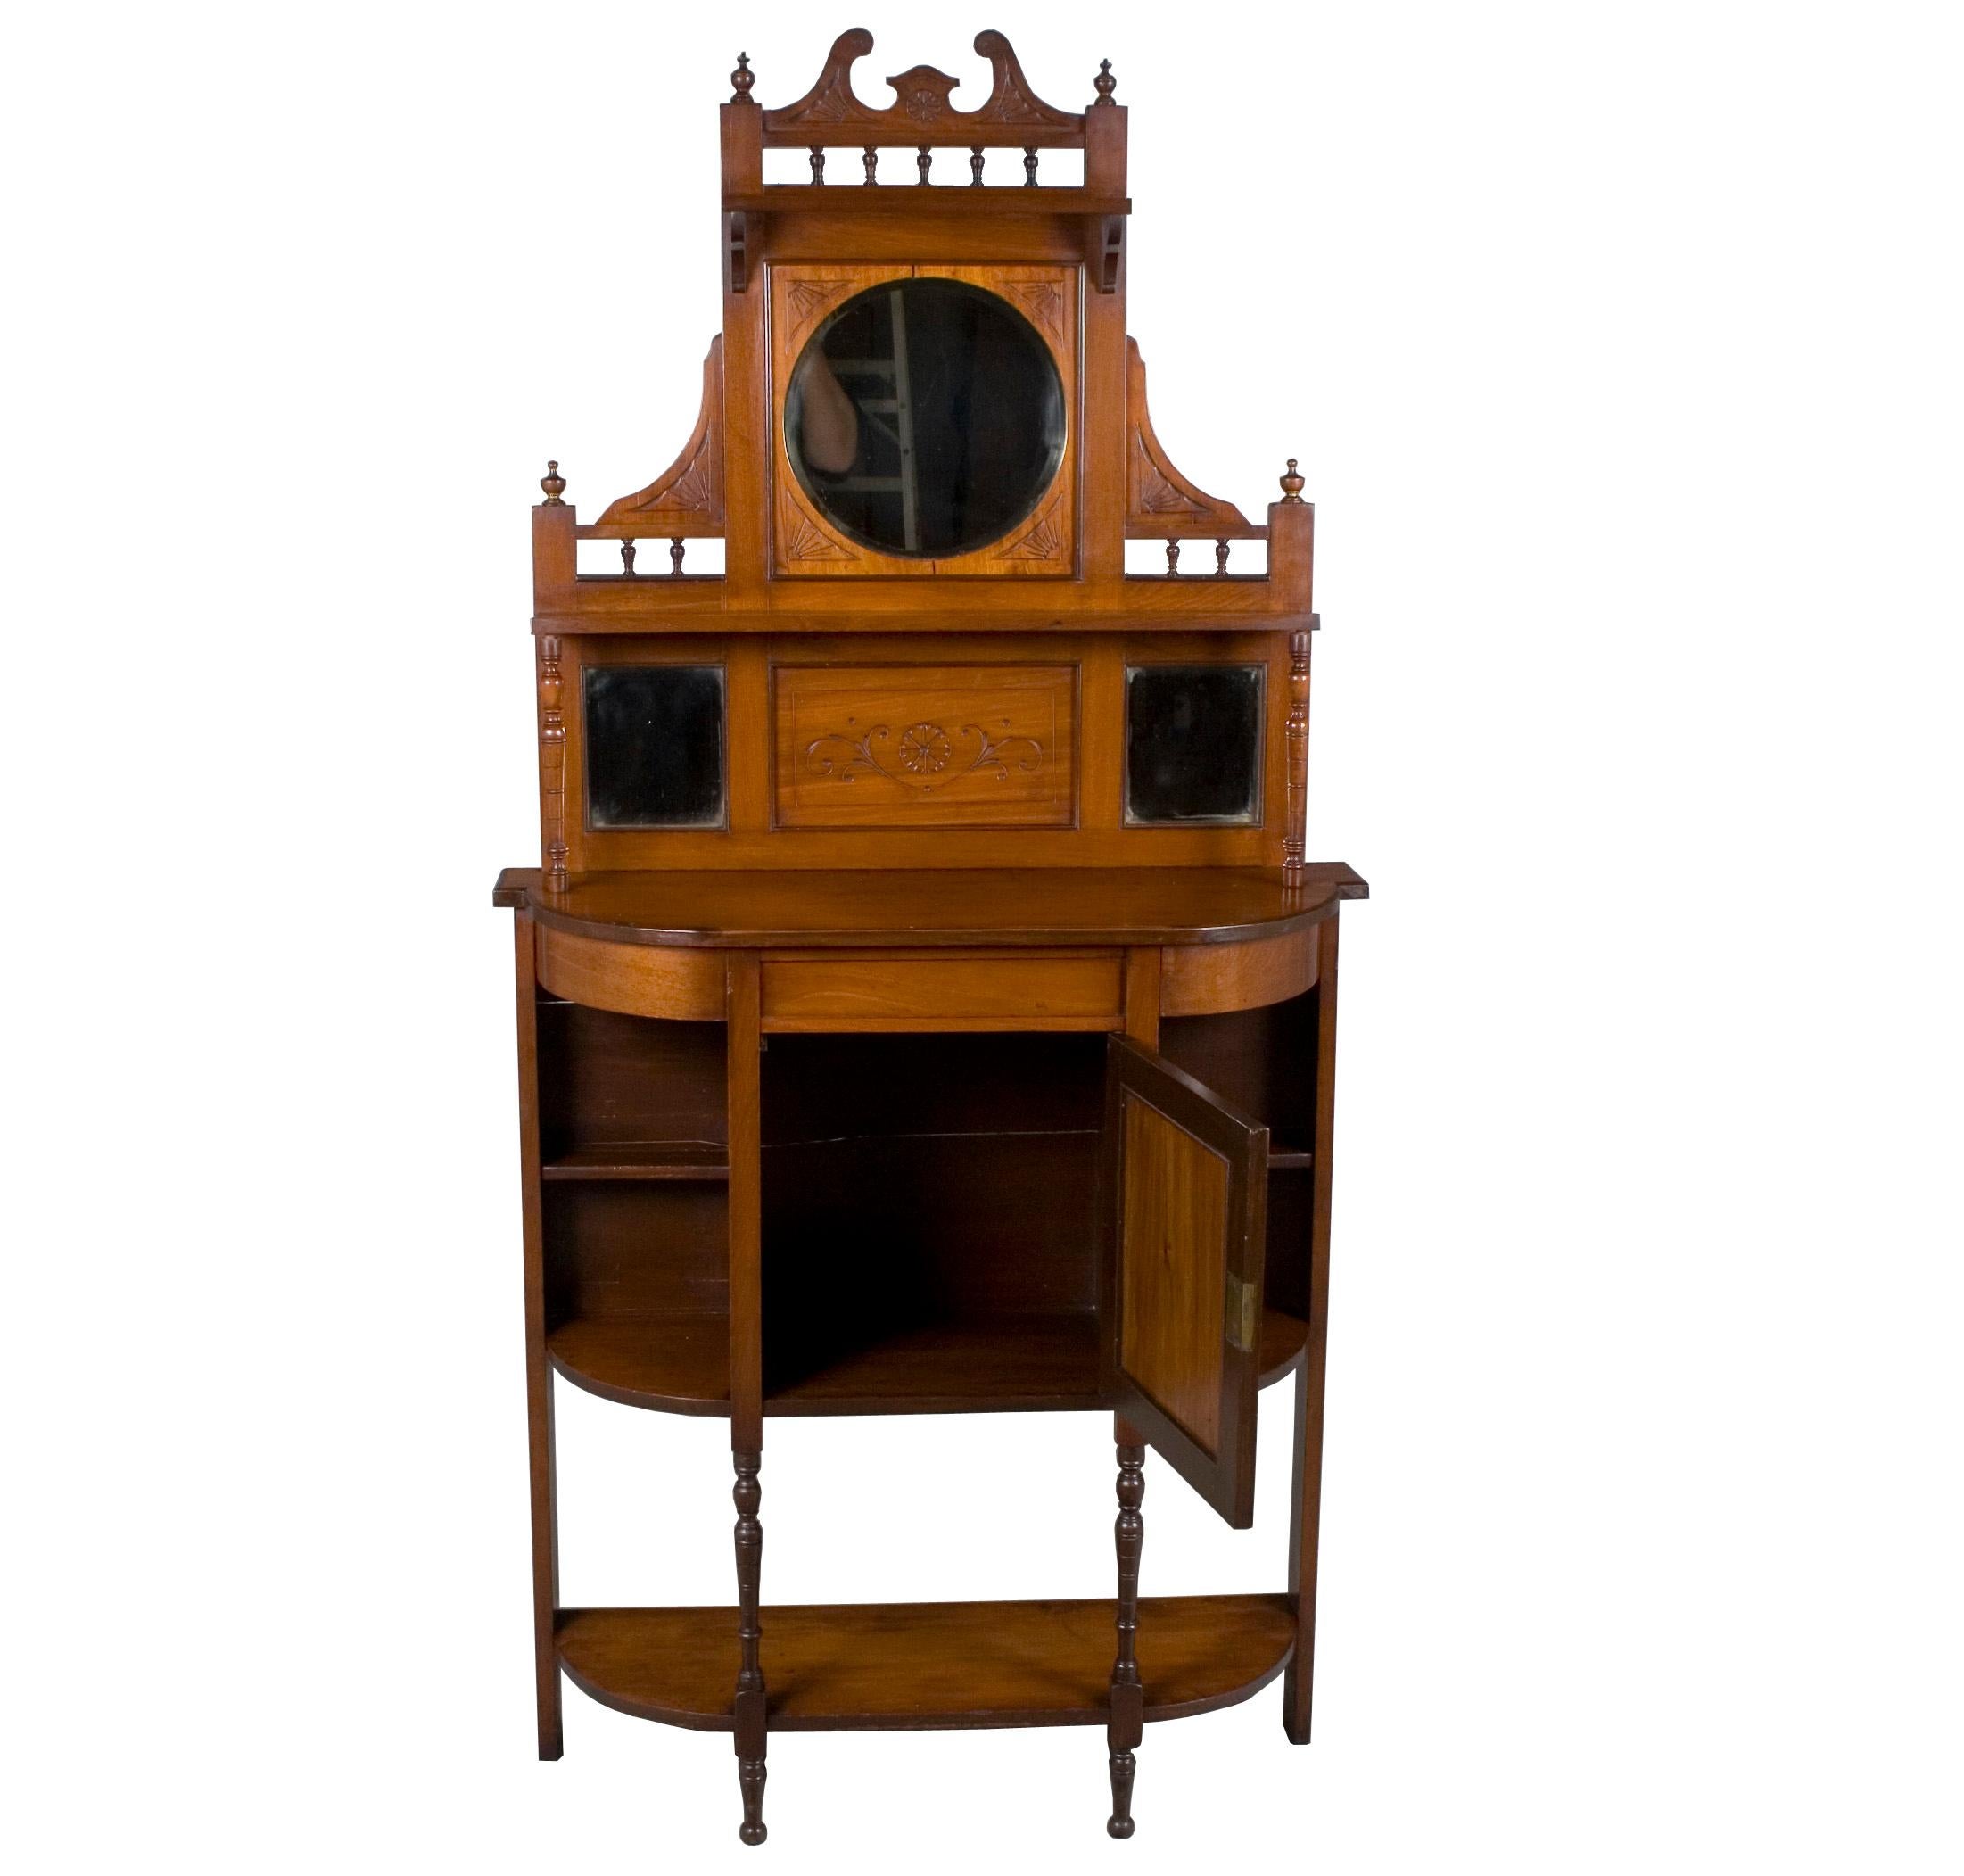 This beautiful piece of furniture comes from England where it was made circa 1910, making it an Edwardian period piece. Today, the walnut remains gorgeous and has developed a stunning patina. It's height and narrow depth make it ideal for many